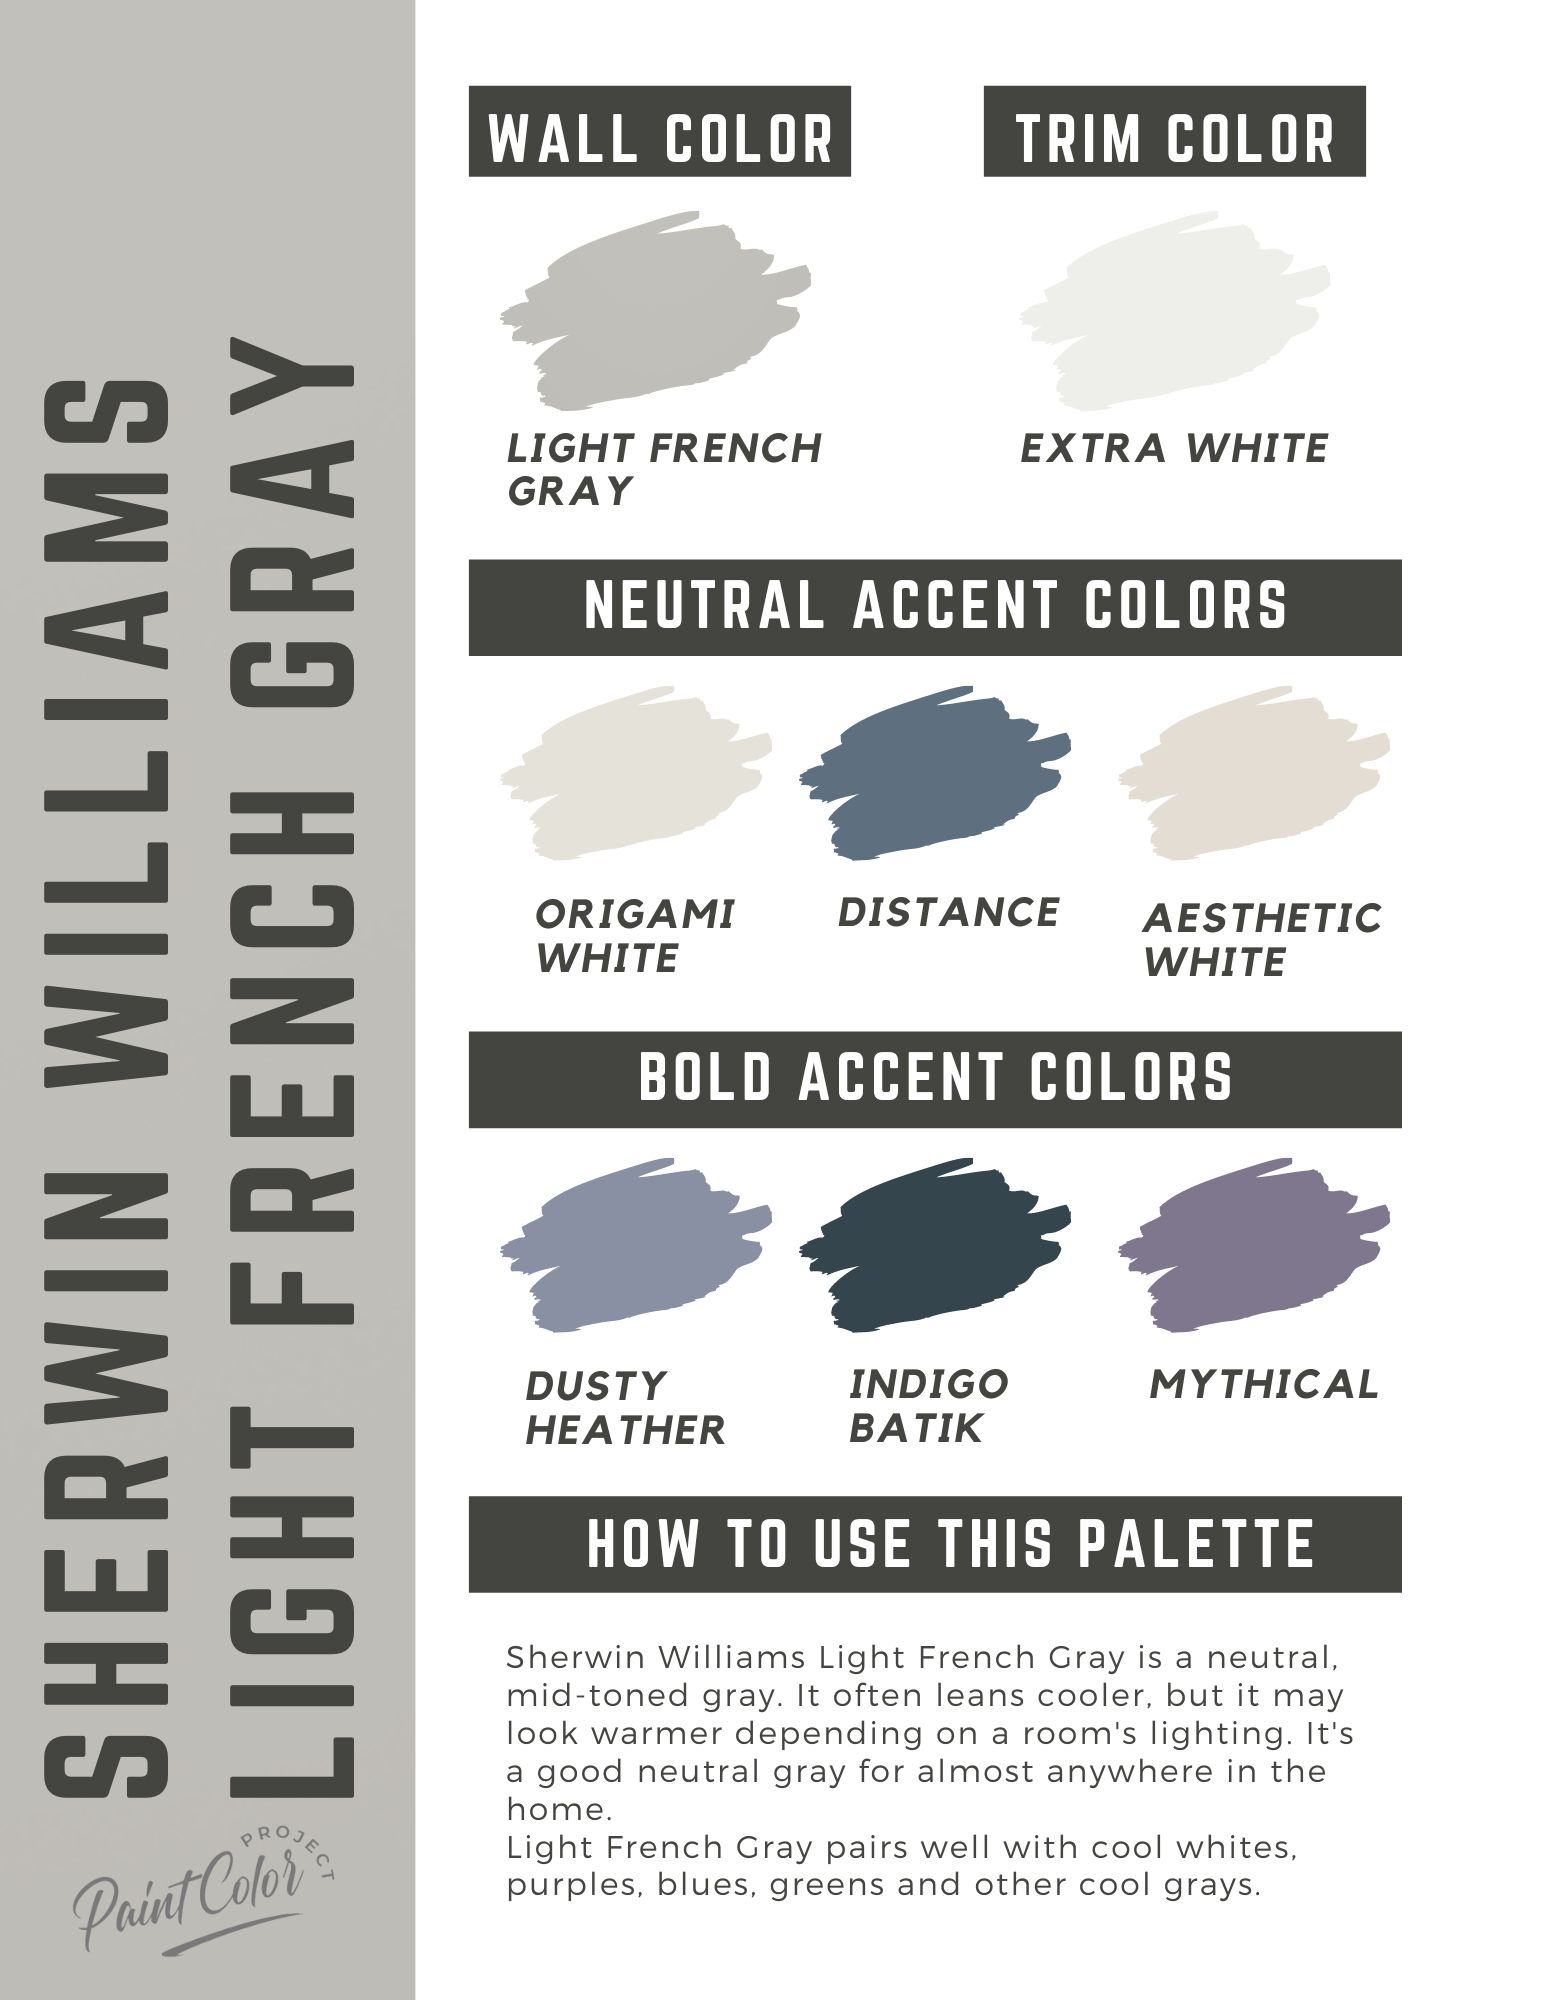 sherwin williams light french gray paint color palette